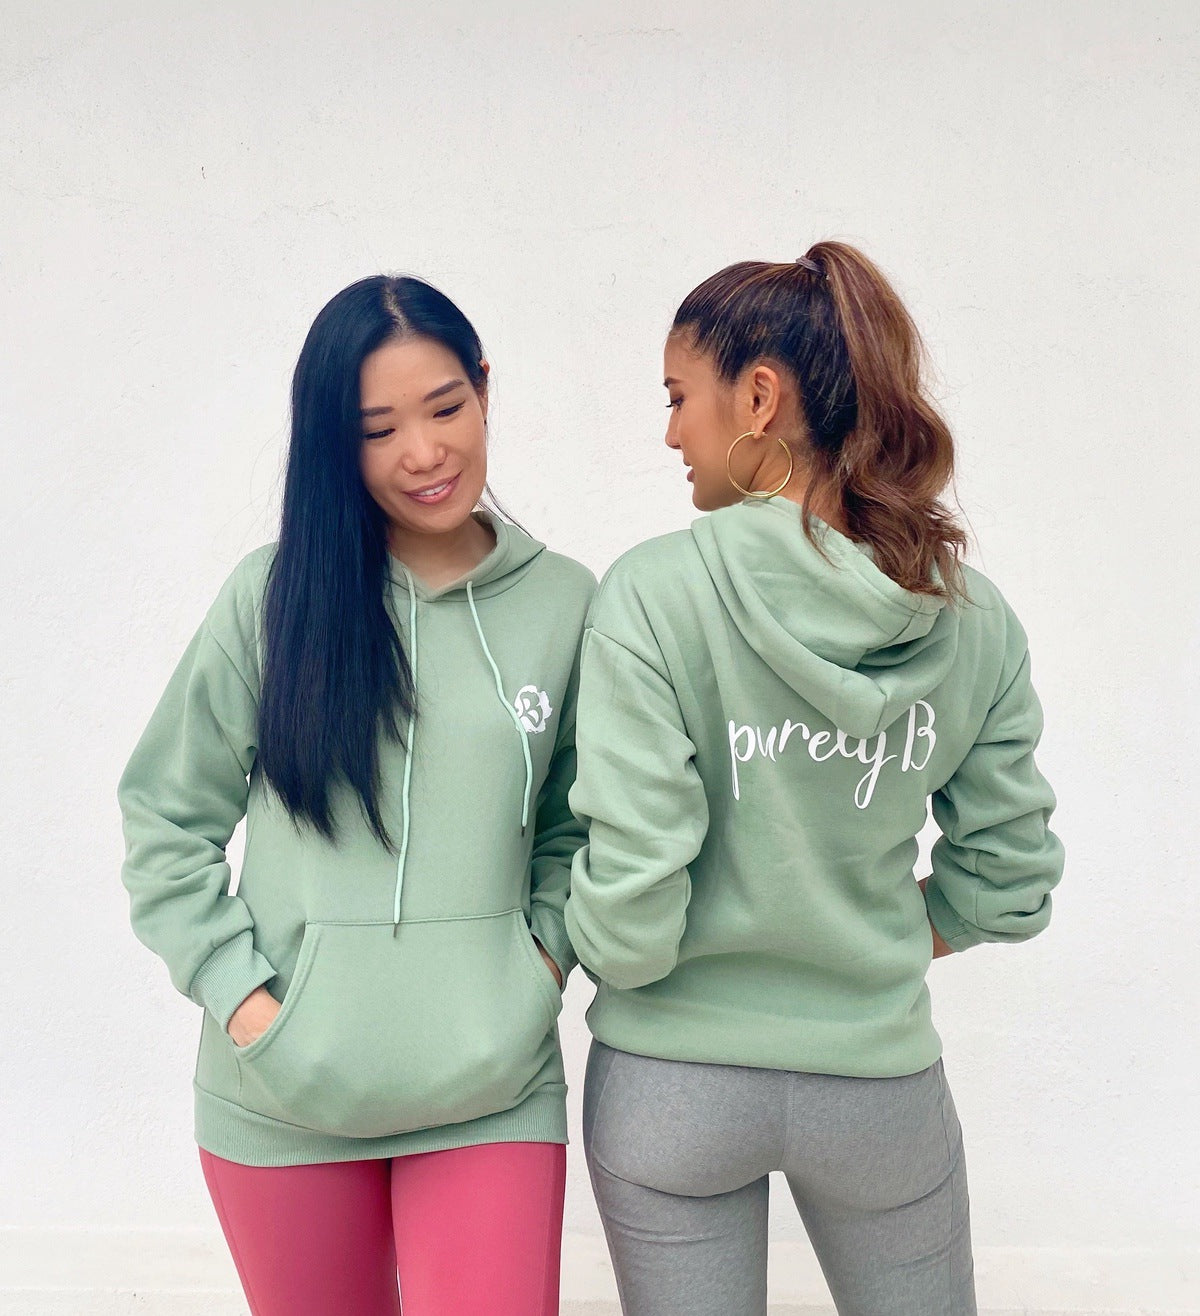 PurelyB Hoodie (Limited Edition)